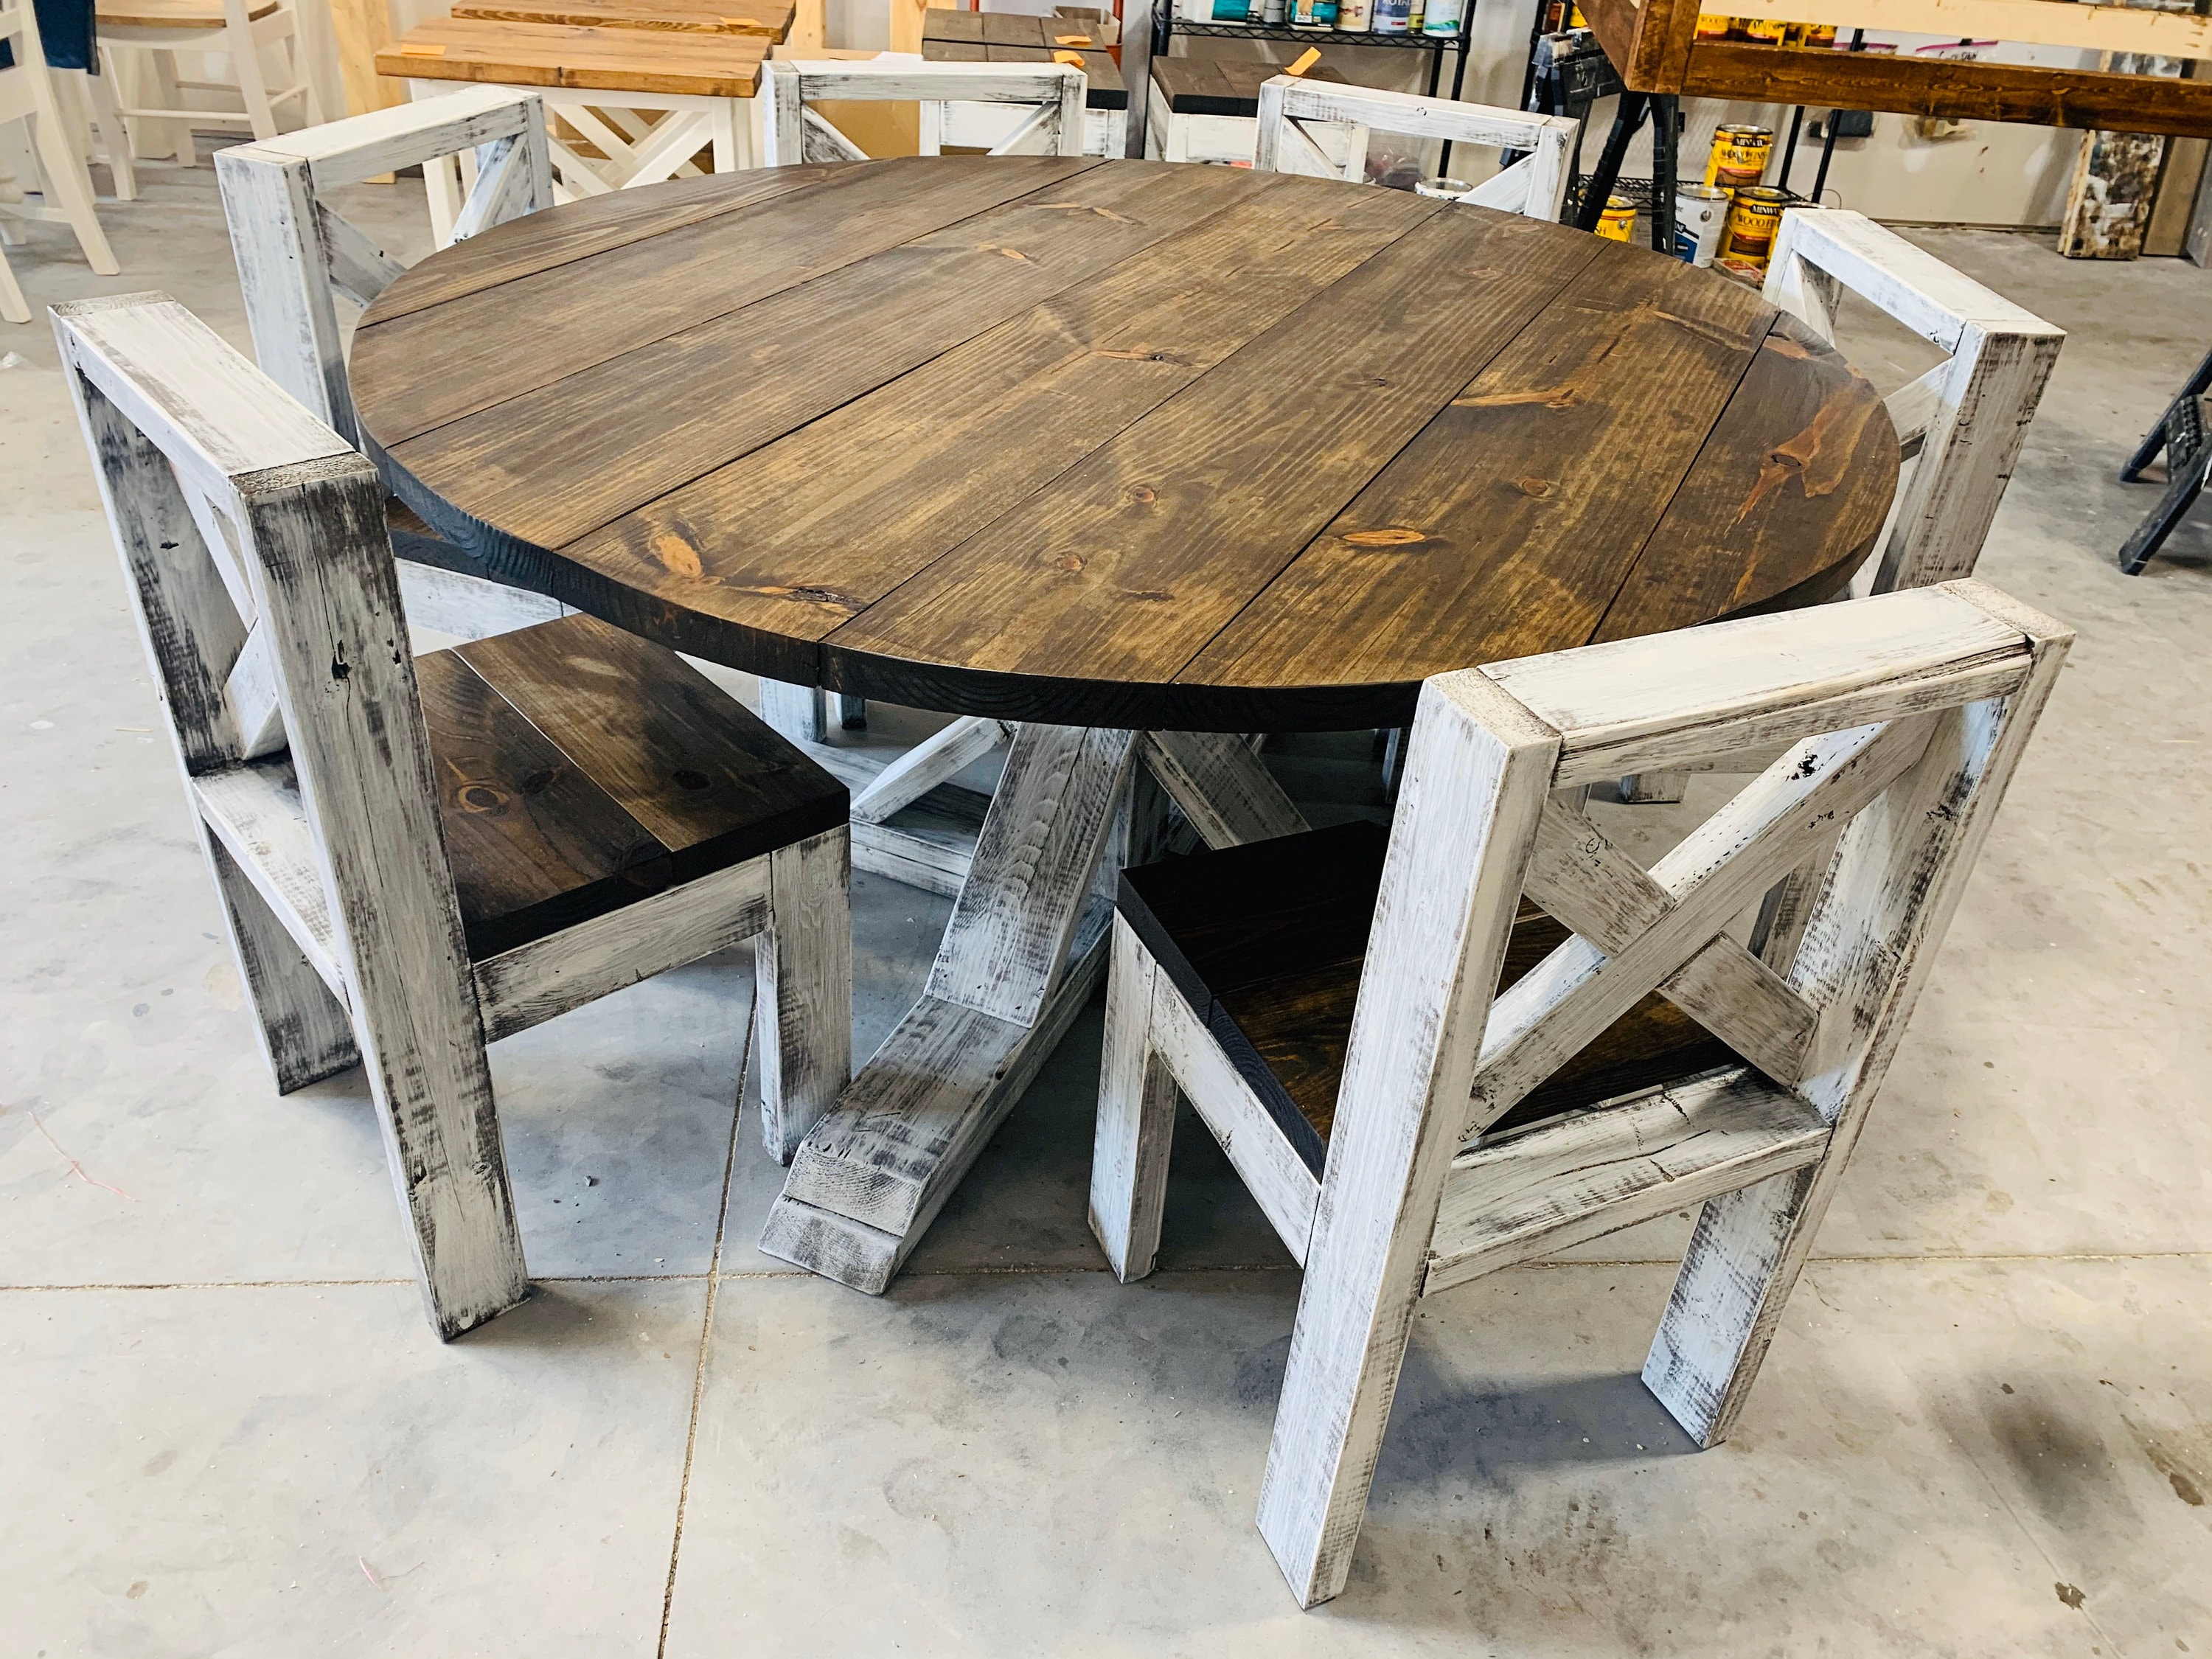 5ft Round Rustic Farmhouse Table with chairs, Single Pedestal Style